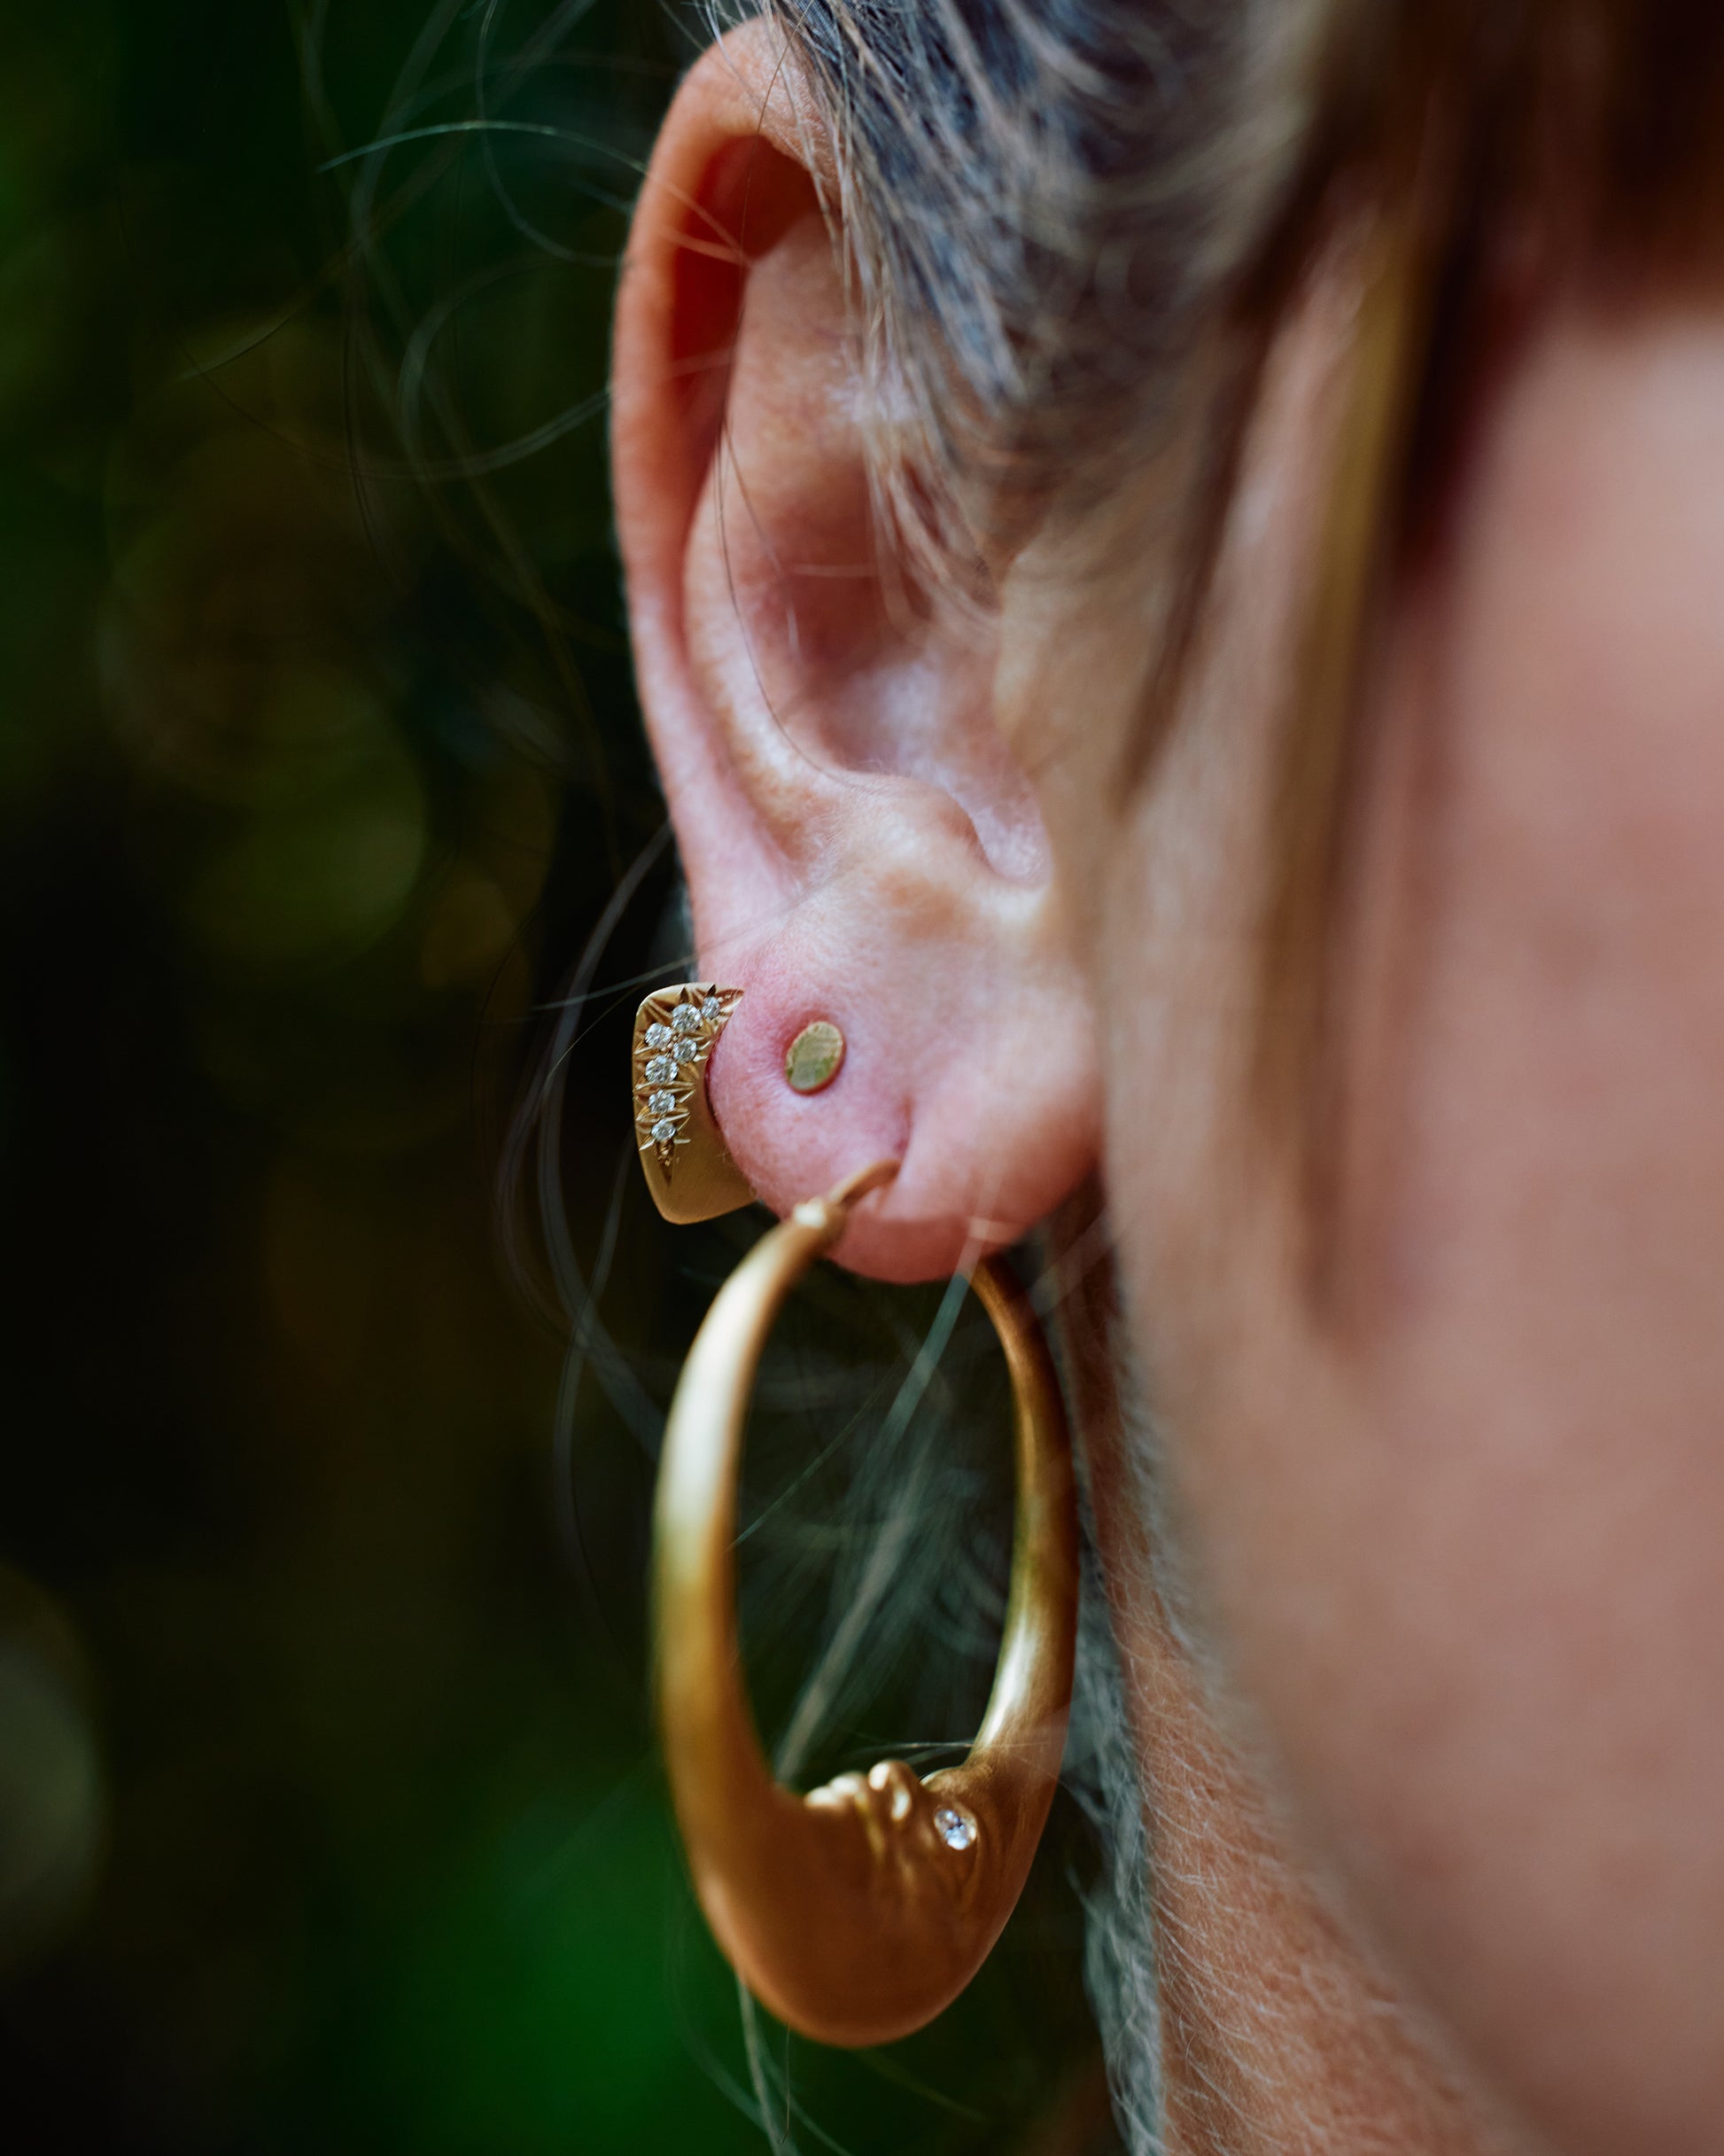 An ear with three earrings; a large gold moon hoop, a round disk stud, and a Yemaya hoop.